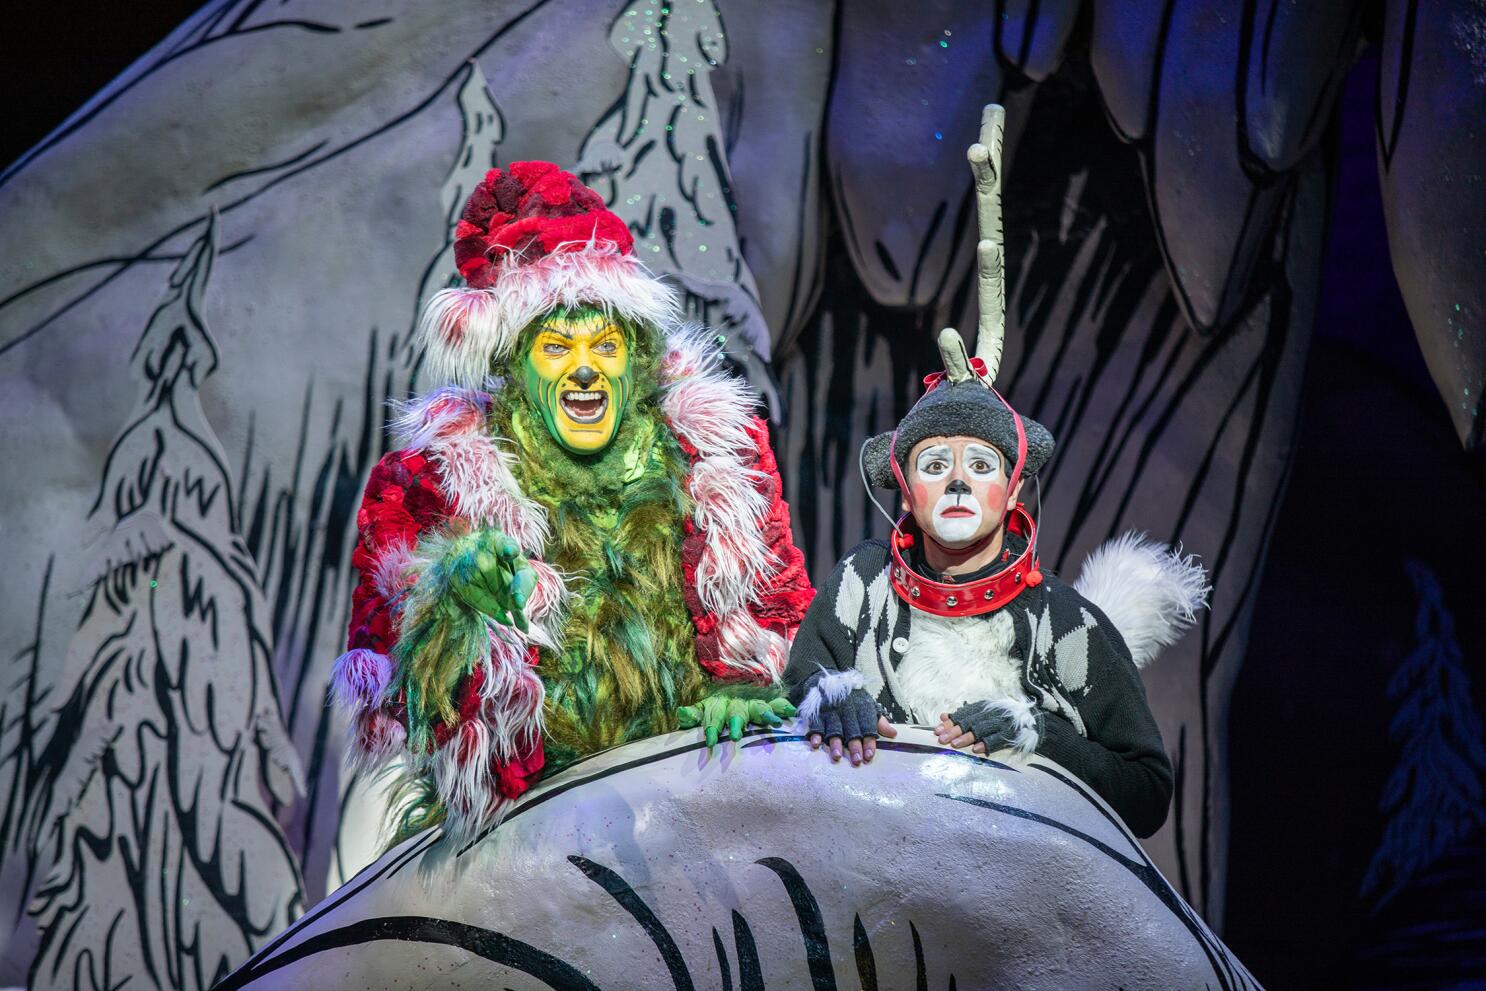 San Diego Broadway Shows: 5 Classic Christmas Movies To Watch This December